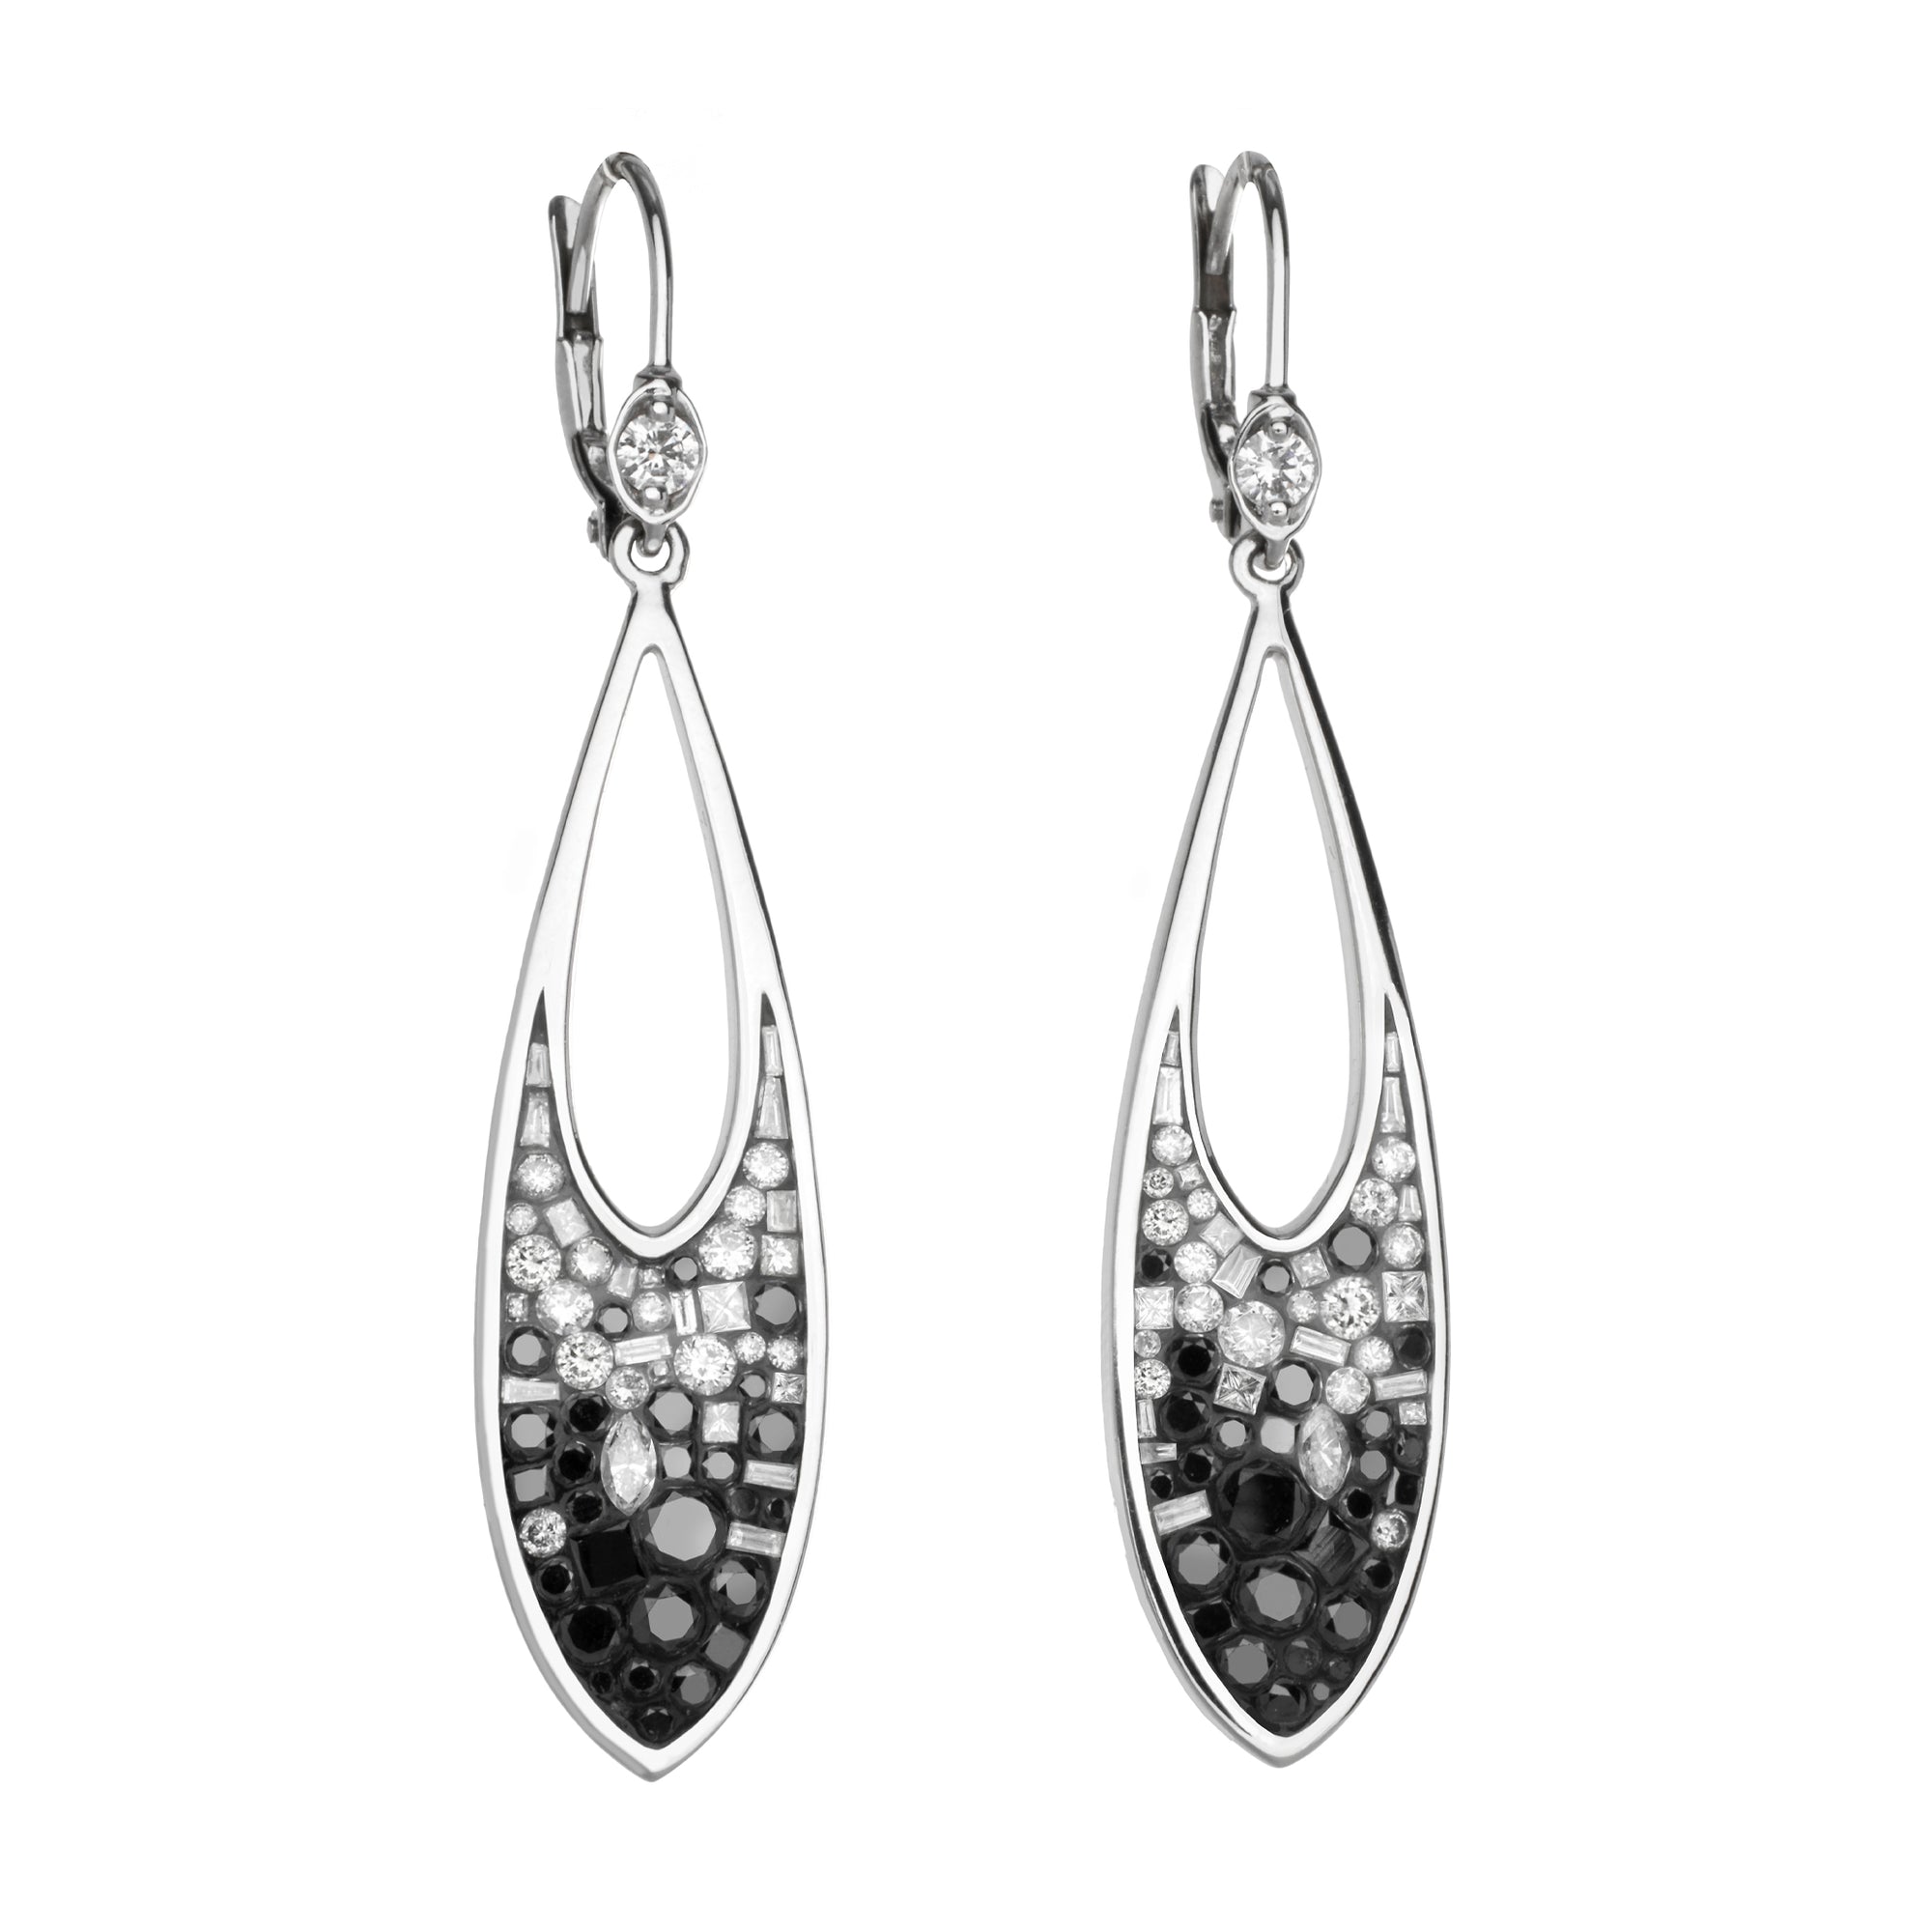 Black Ombre Pear Diamond Earrings by Pleve available at Talisman Collection Fine Jewelers in El Dorado Hills, CA and online. Specs: 18k wg dia & color enhanced dia 2.90 cttw. 